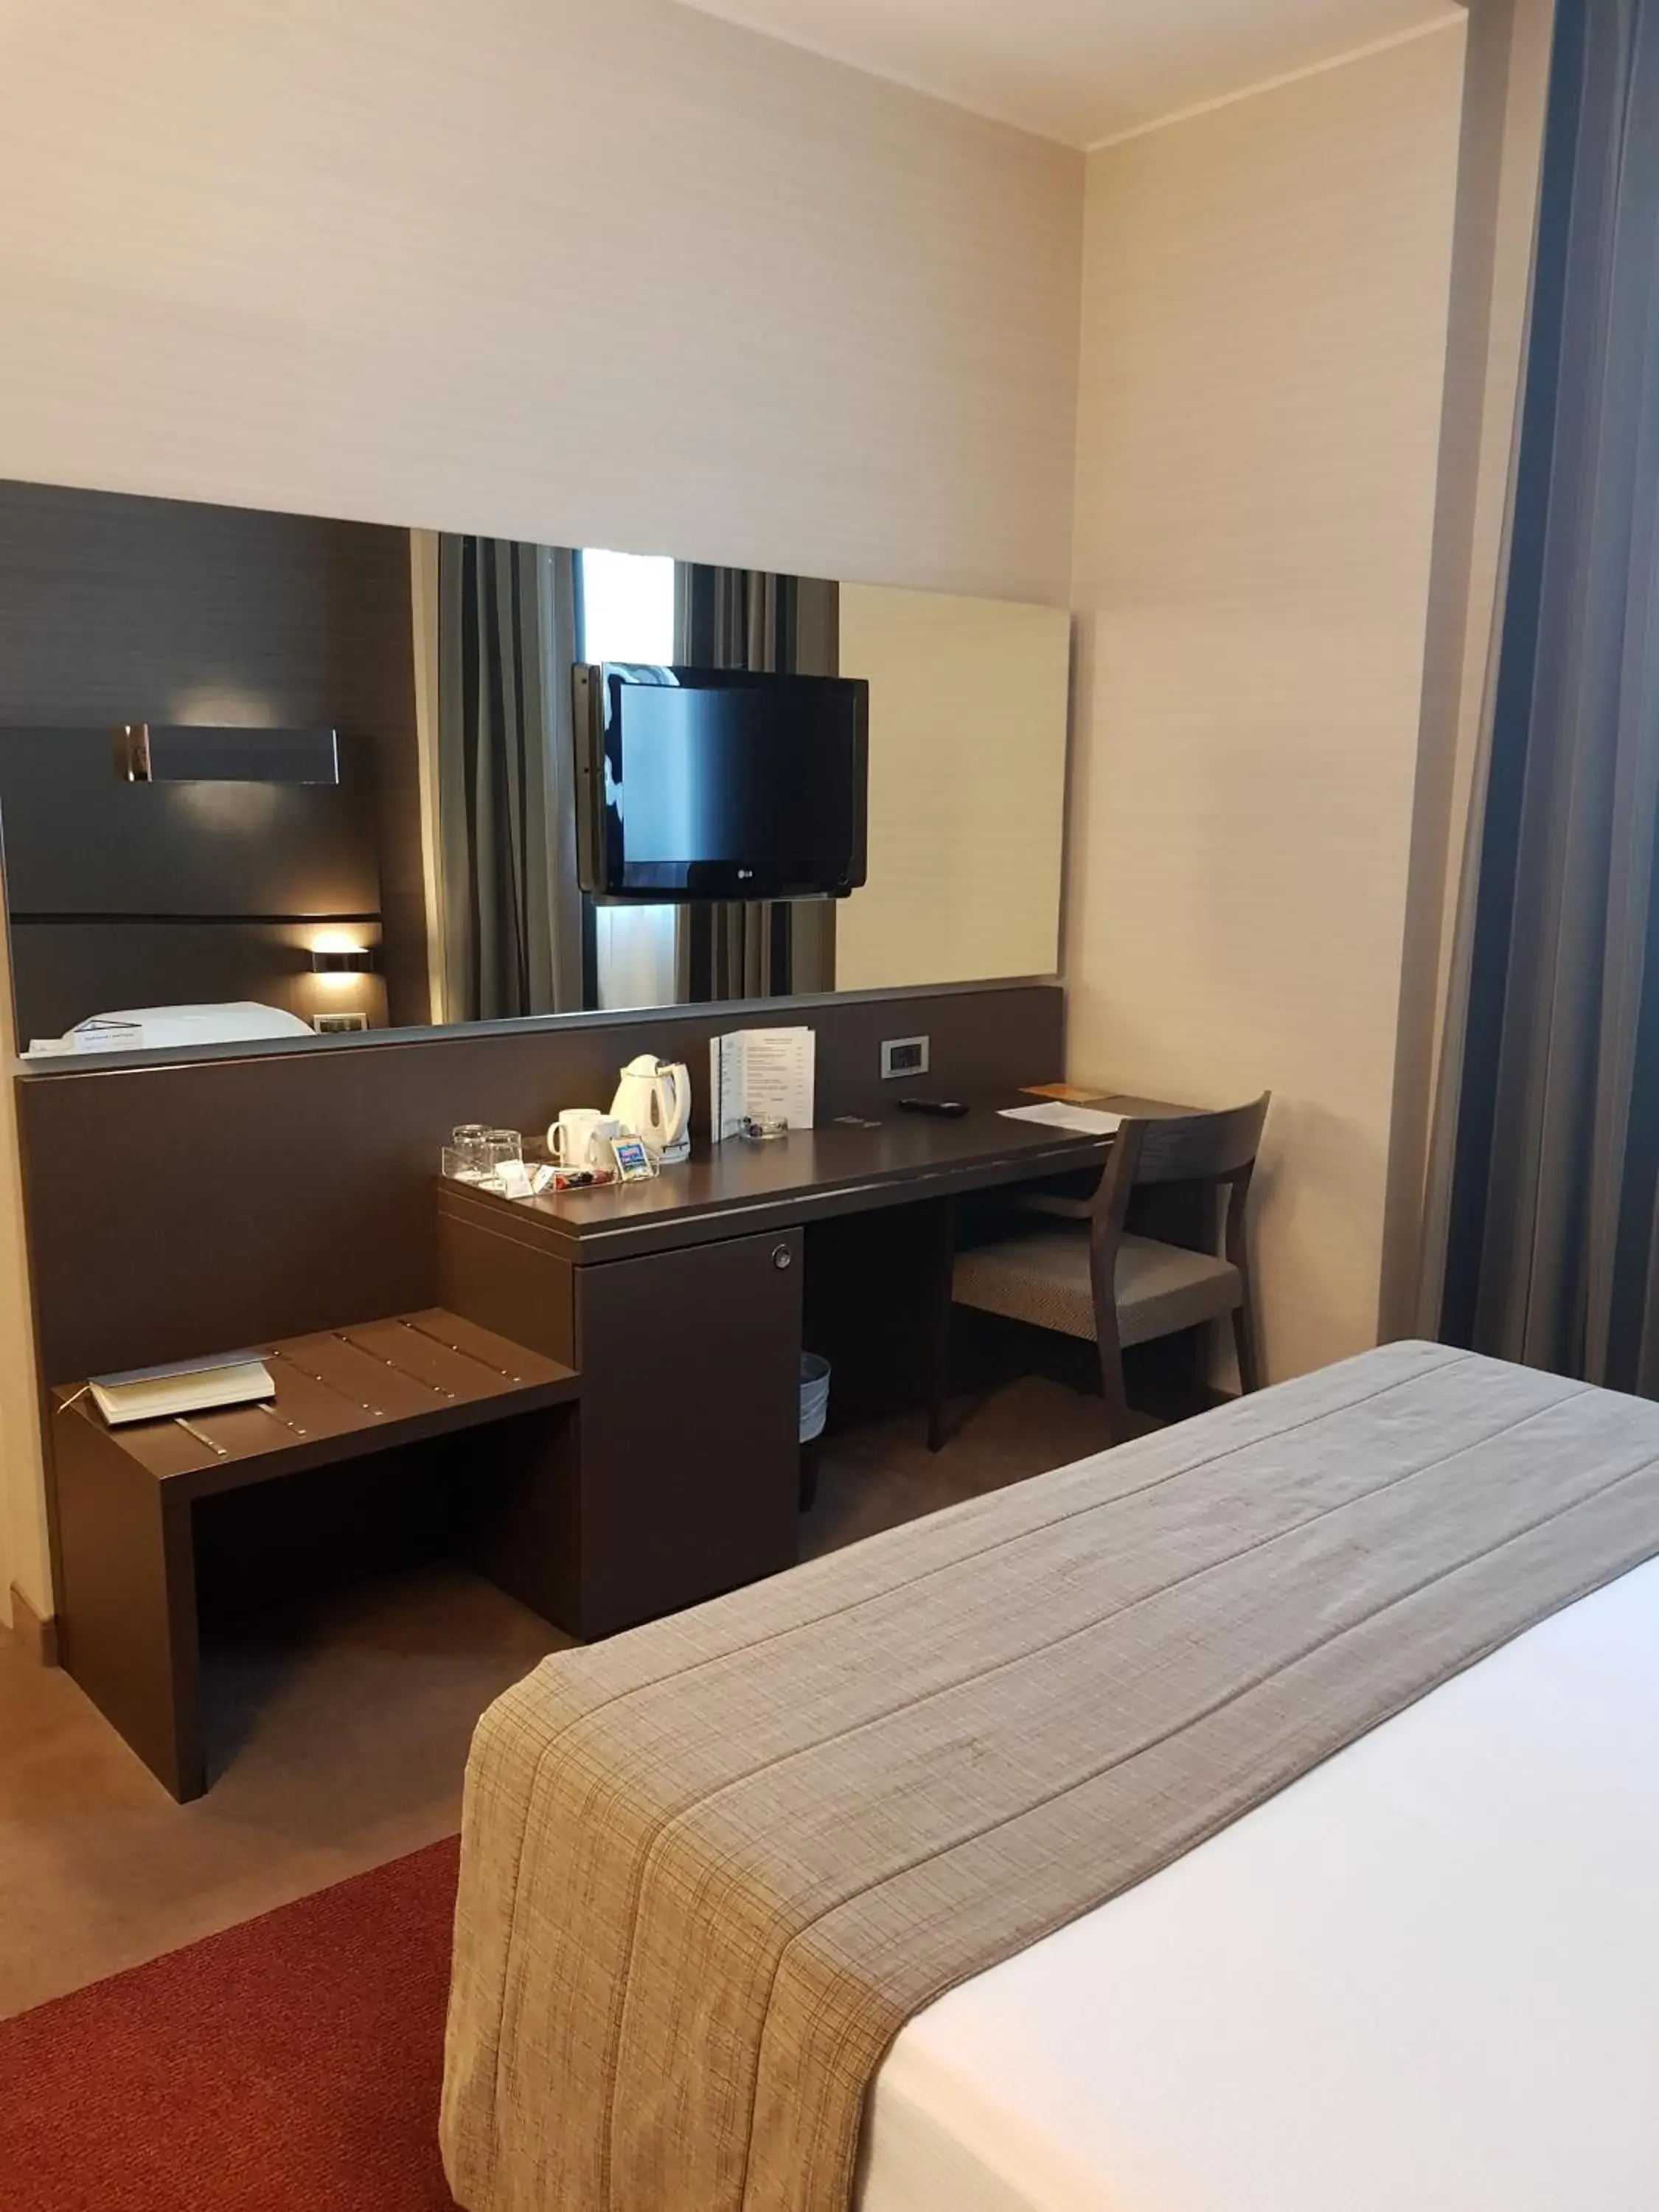 Bed, TV/Entertainment Center in Best Western Premier Hotel Monza E Brianza Palace